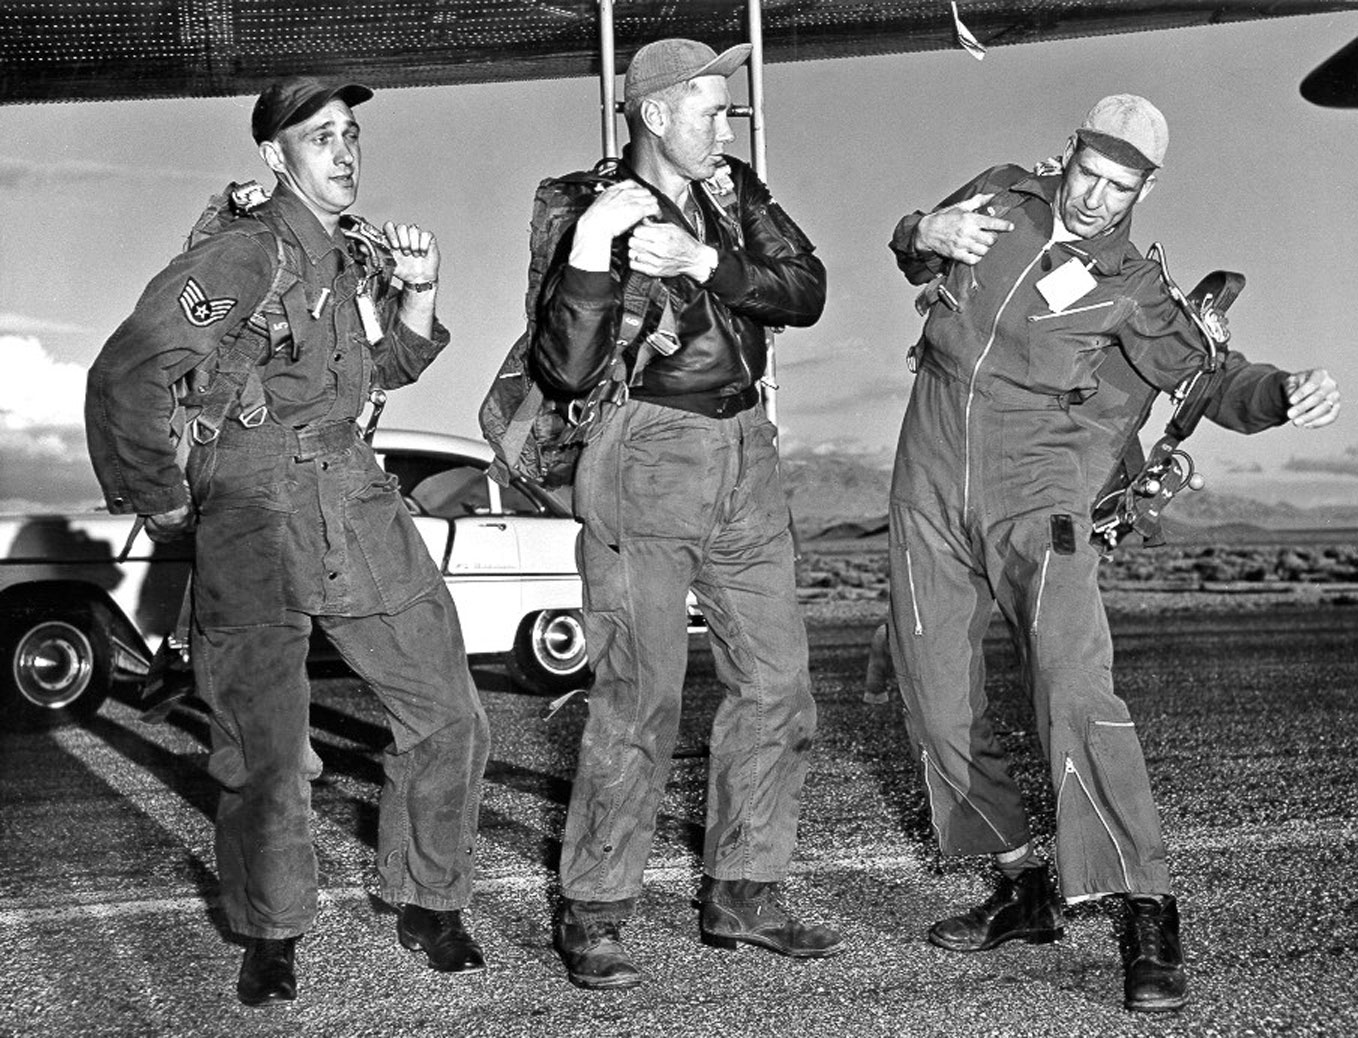 Three flight crewmen don their parachutes before boarding the B-36H Peacemaker for Operation Teapot HA, 5 April 1955. The automobile behind them is a 1955 Chevrolet Bel Air 4-door sedan. (U.S. Air Force)